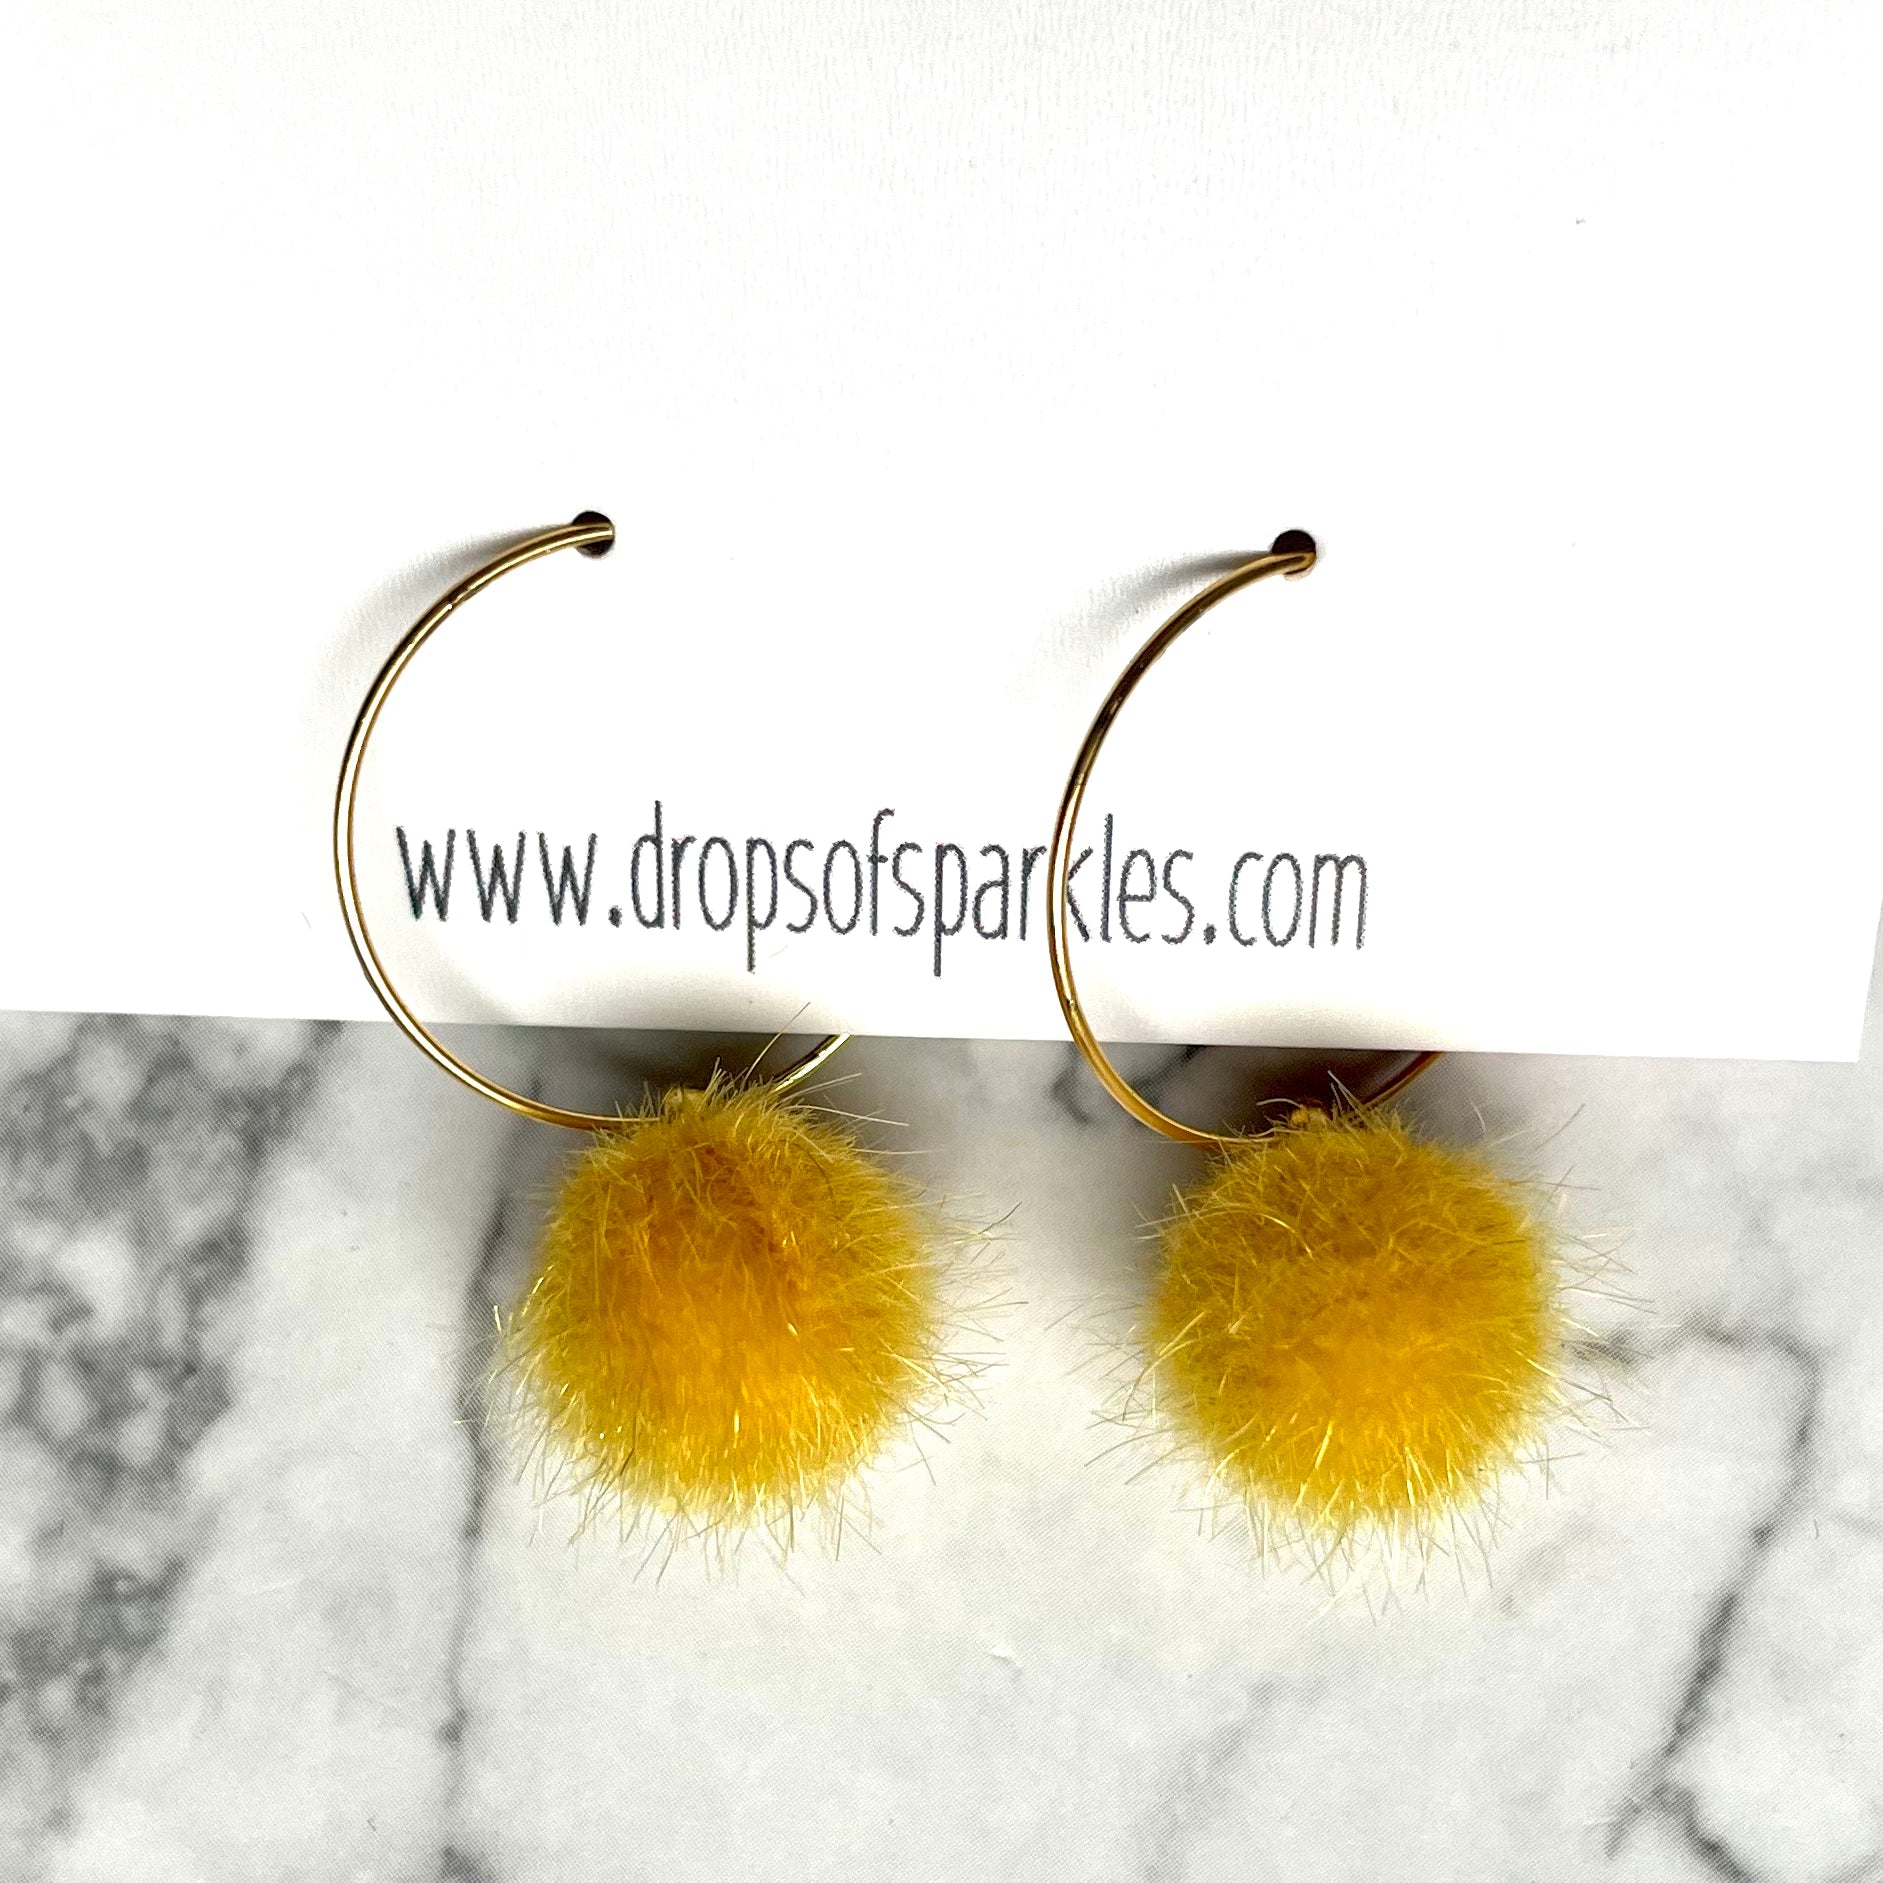 20mm round 24k shiny gold plated  "hoops" with fun little canary yellow fuzzy pom poms attached